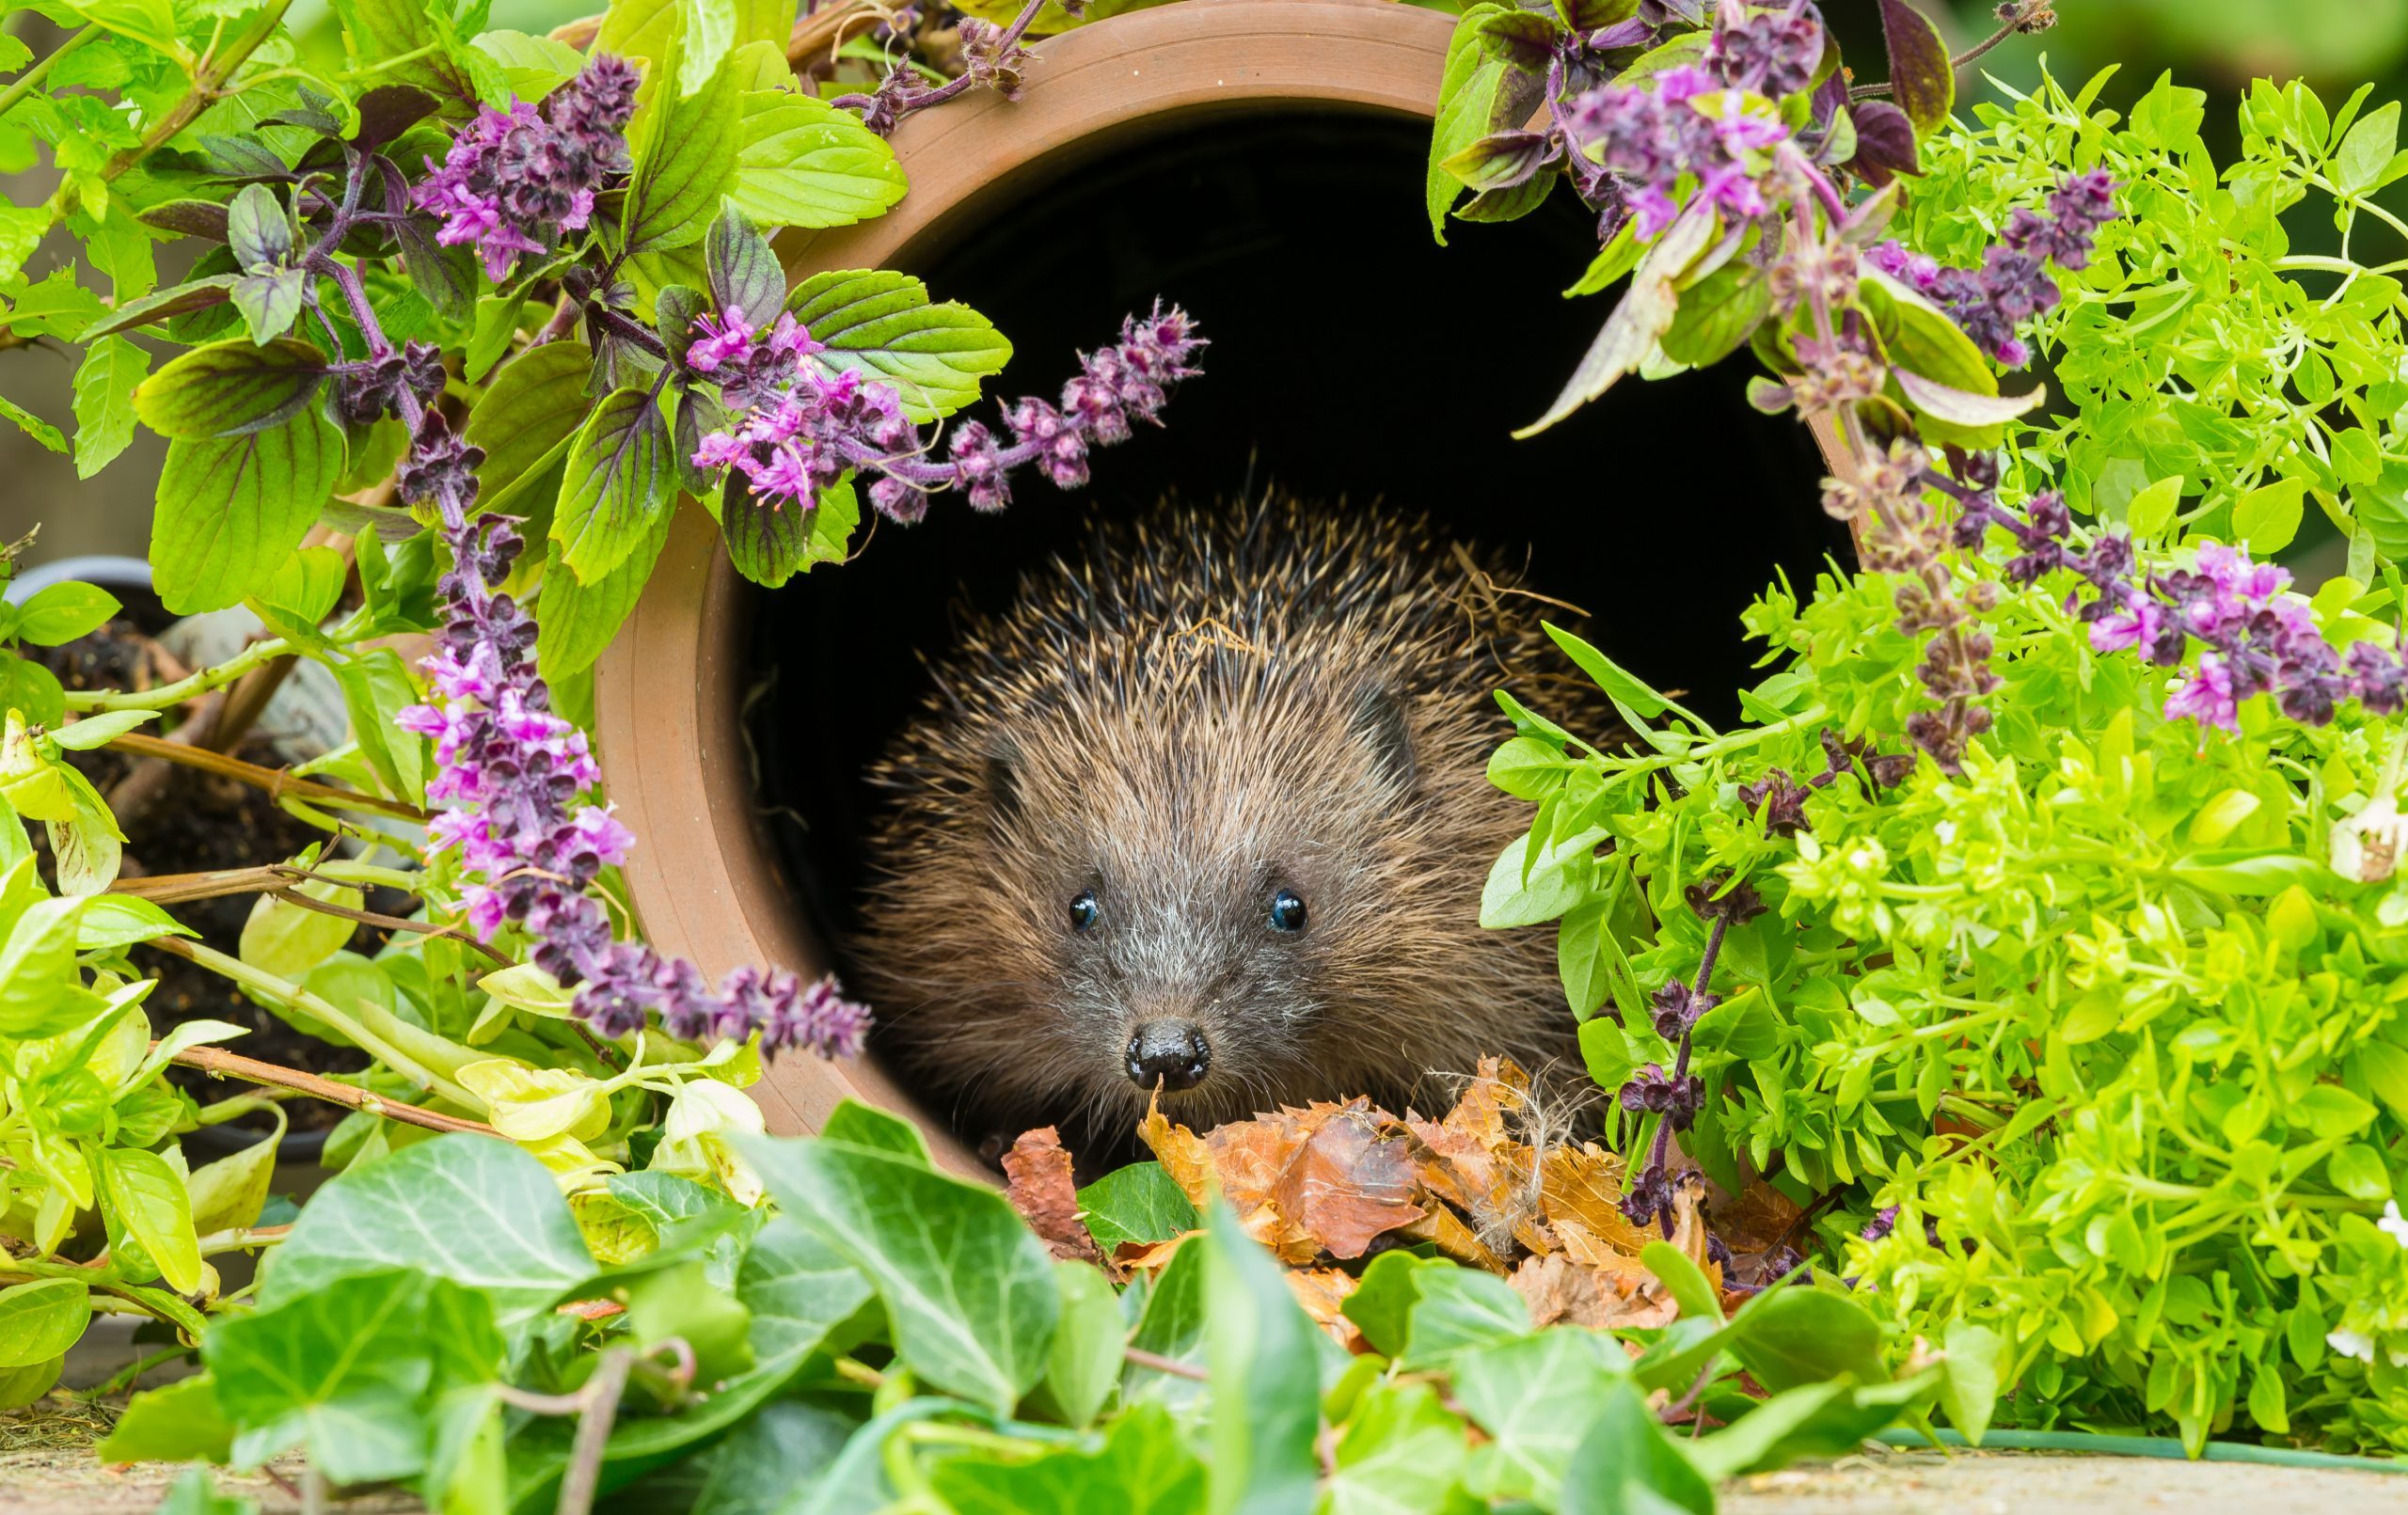 Hedgehog in Summertime, inside a clay drainage pipe with colourful flowering herbs